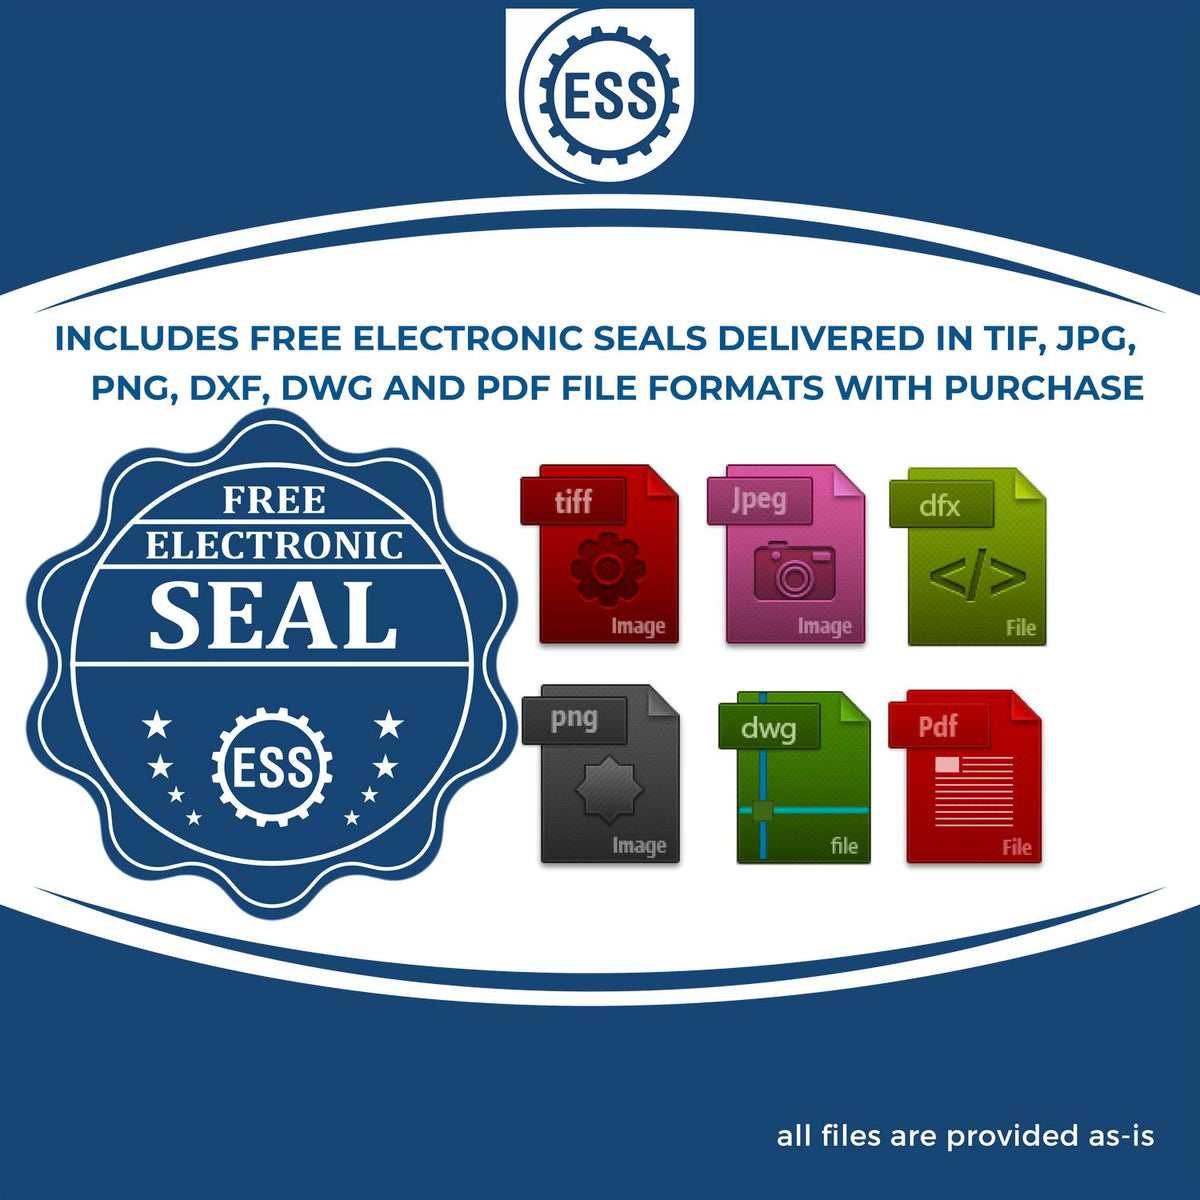 An infographic for the free electronic seal for the Gift Idaho Landscape Architect Seal illustrating the different file type icons such as DXF, DWG, TIF, JPG and PNG.